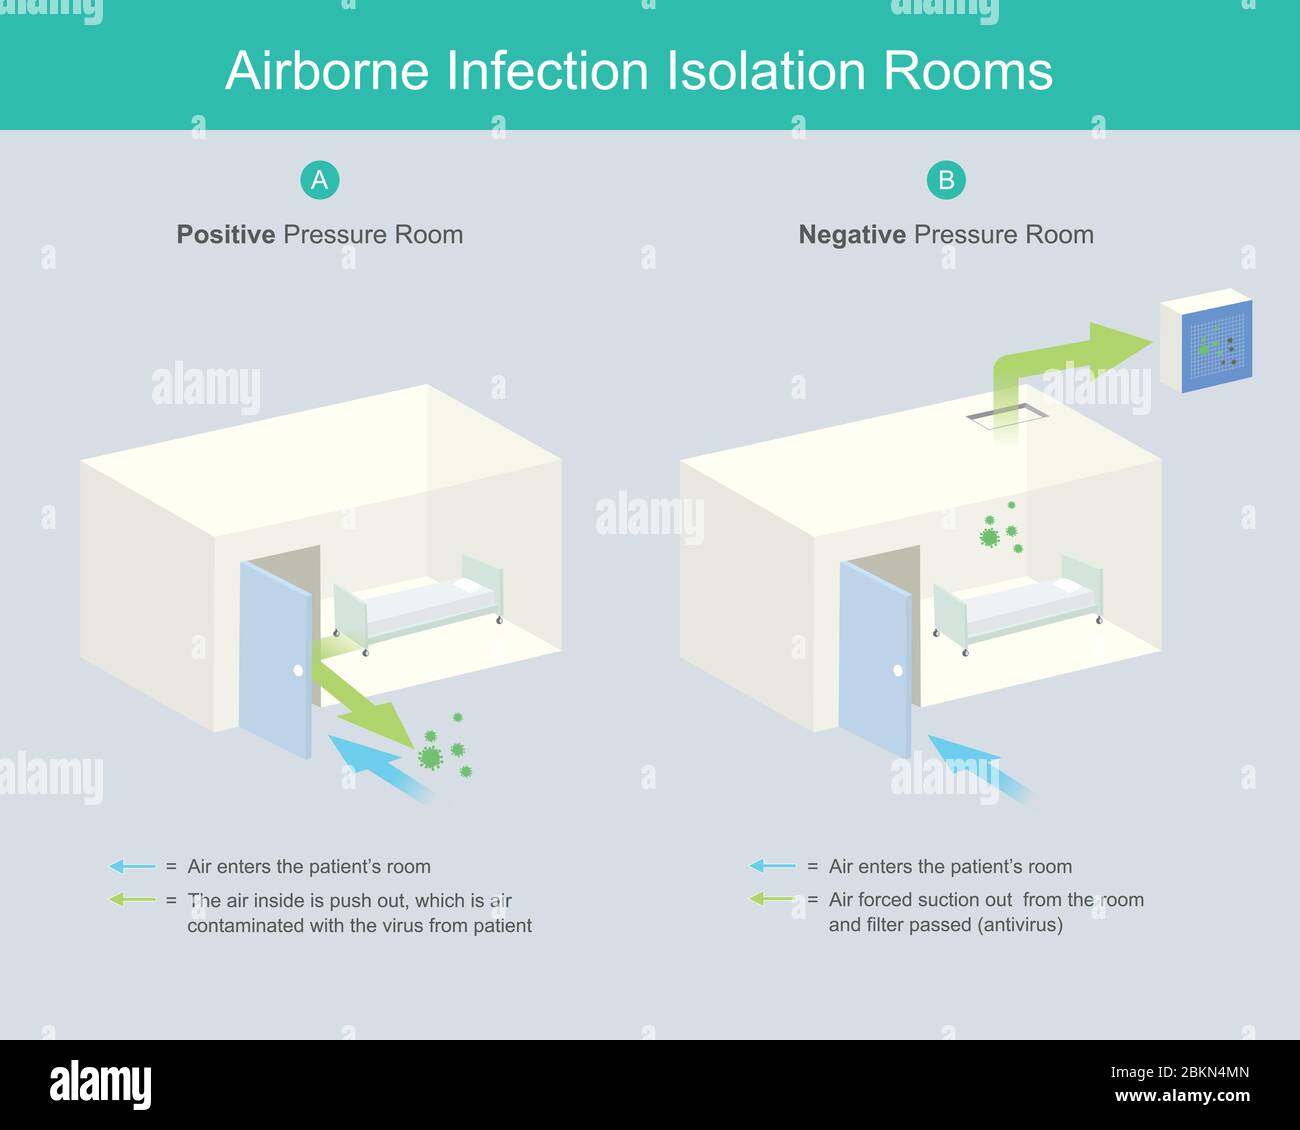 Airborne Infection Isolation Rooms. Airborne Infection Isolation Rooms (AIIR) is control room under negative pressure to prevent air have virus infect Stock Vector